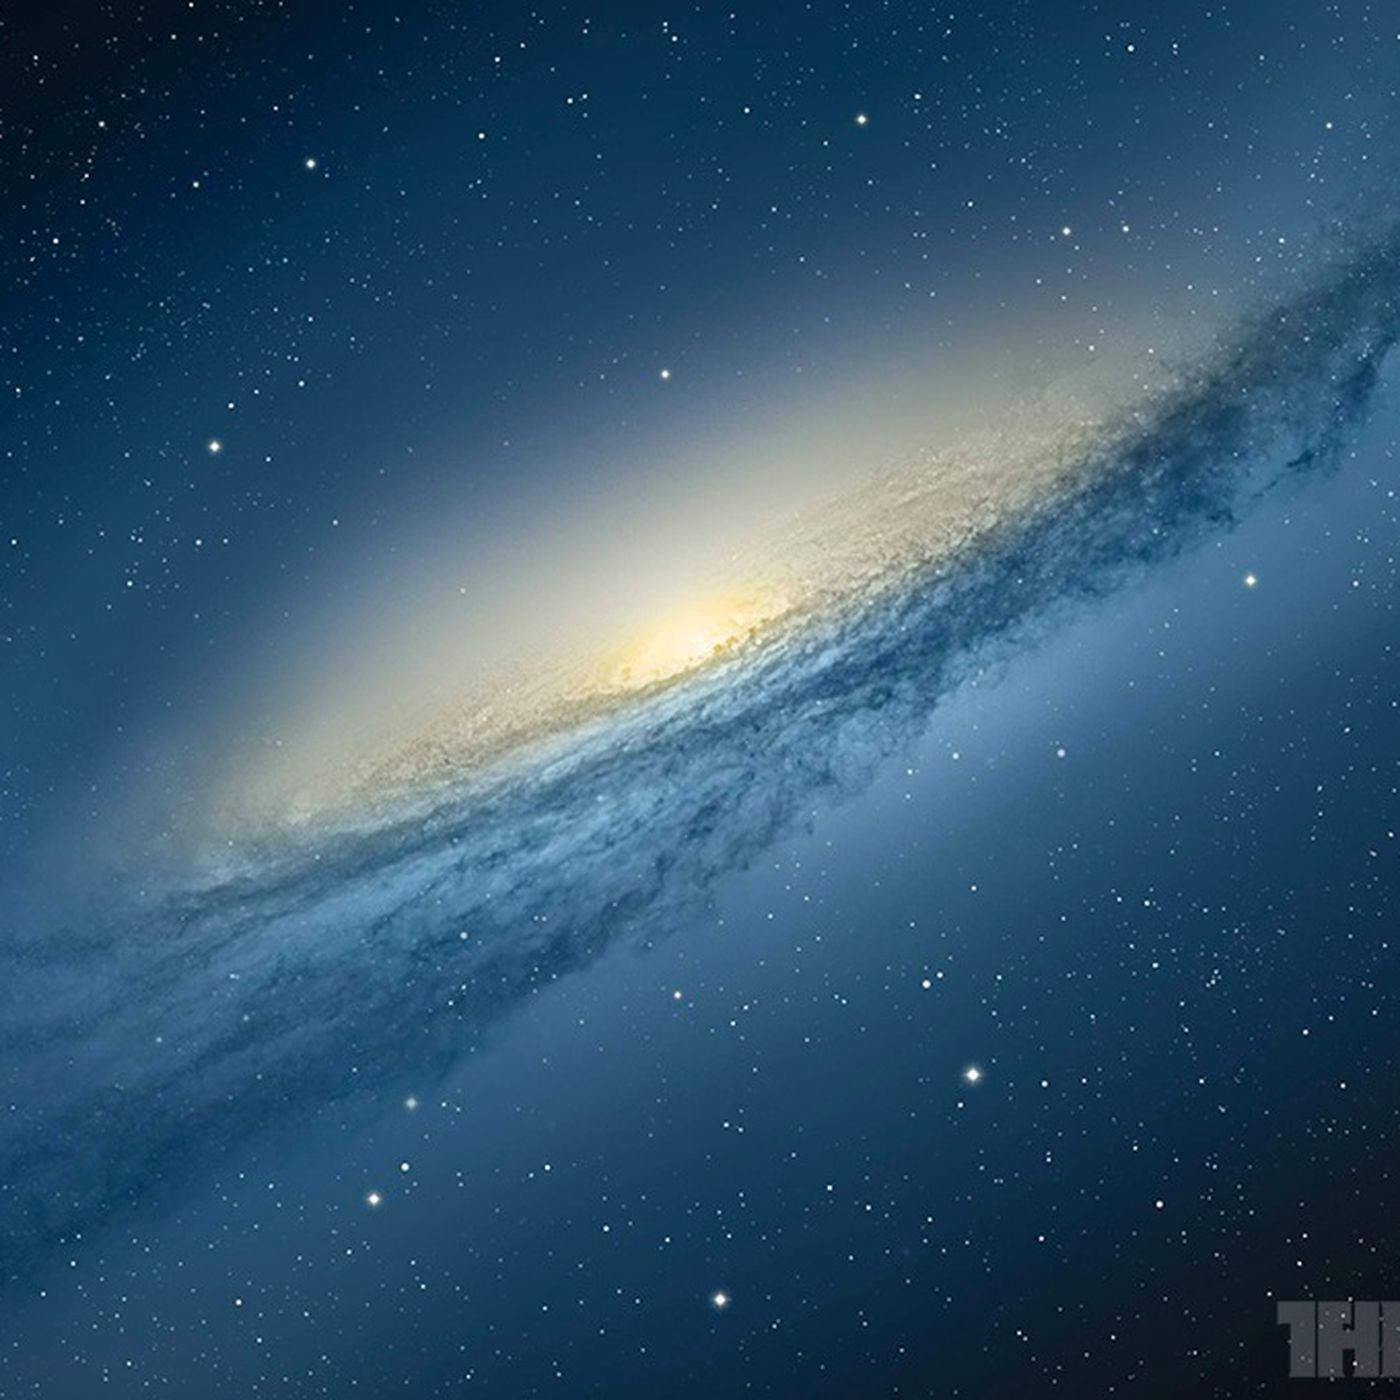 Apple erases another few galaxies for Mountain Lion wallpaper